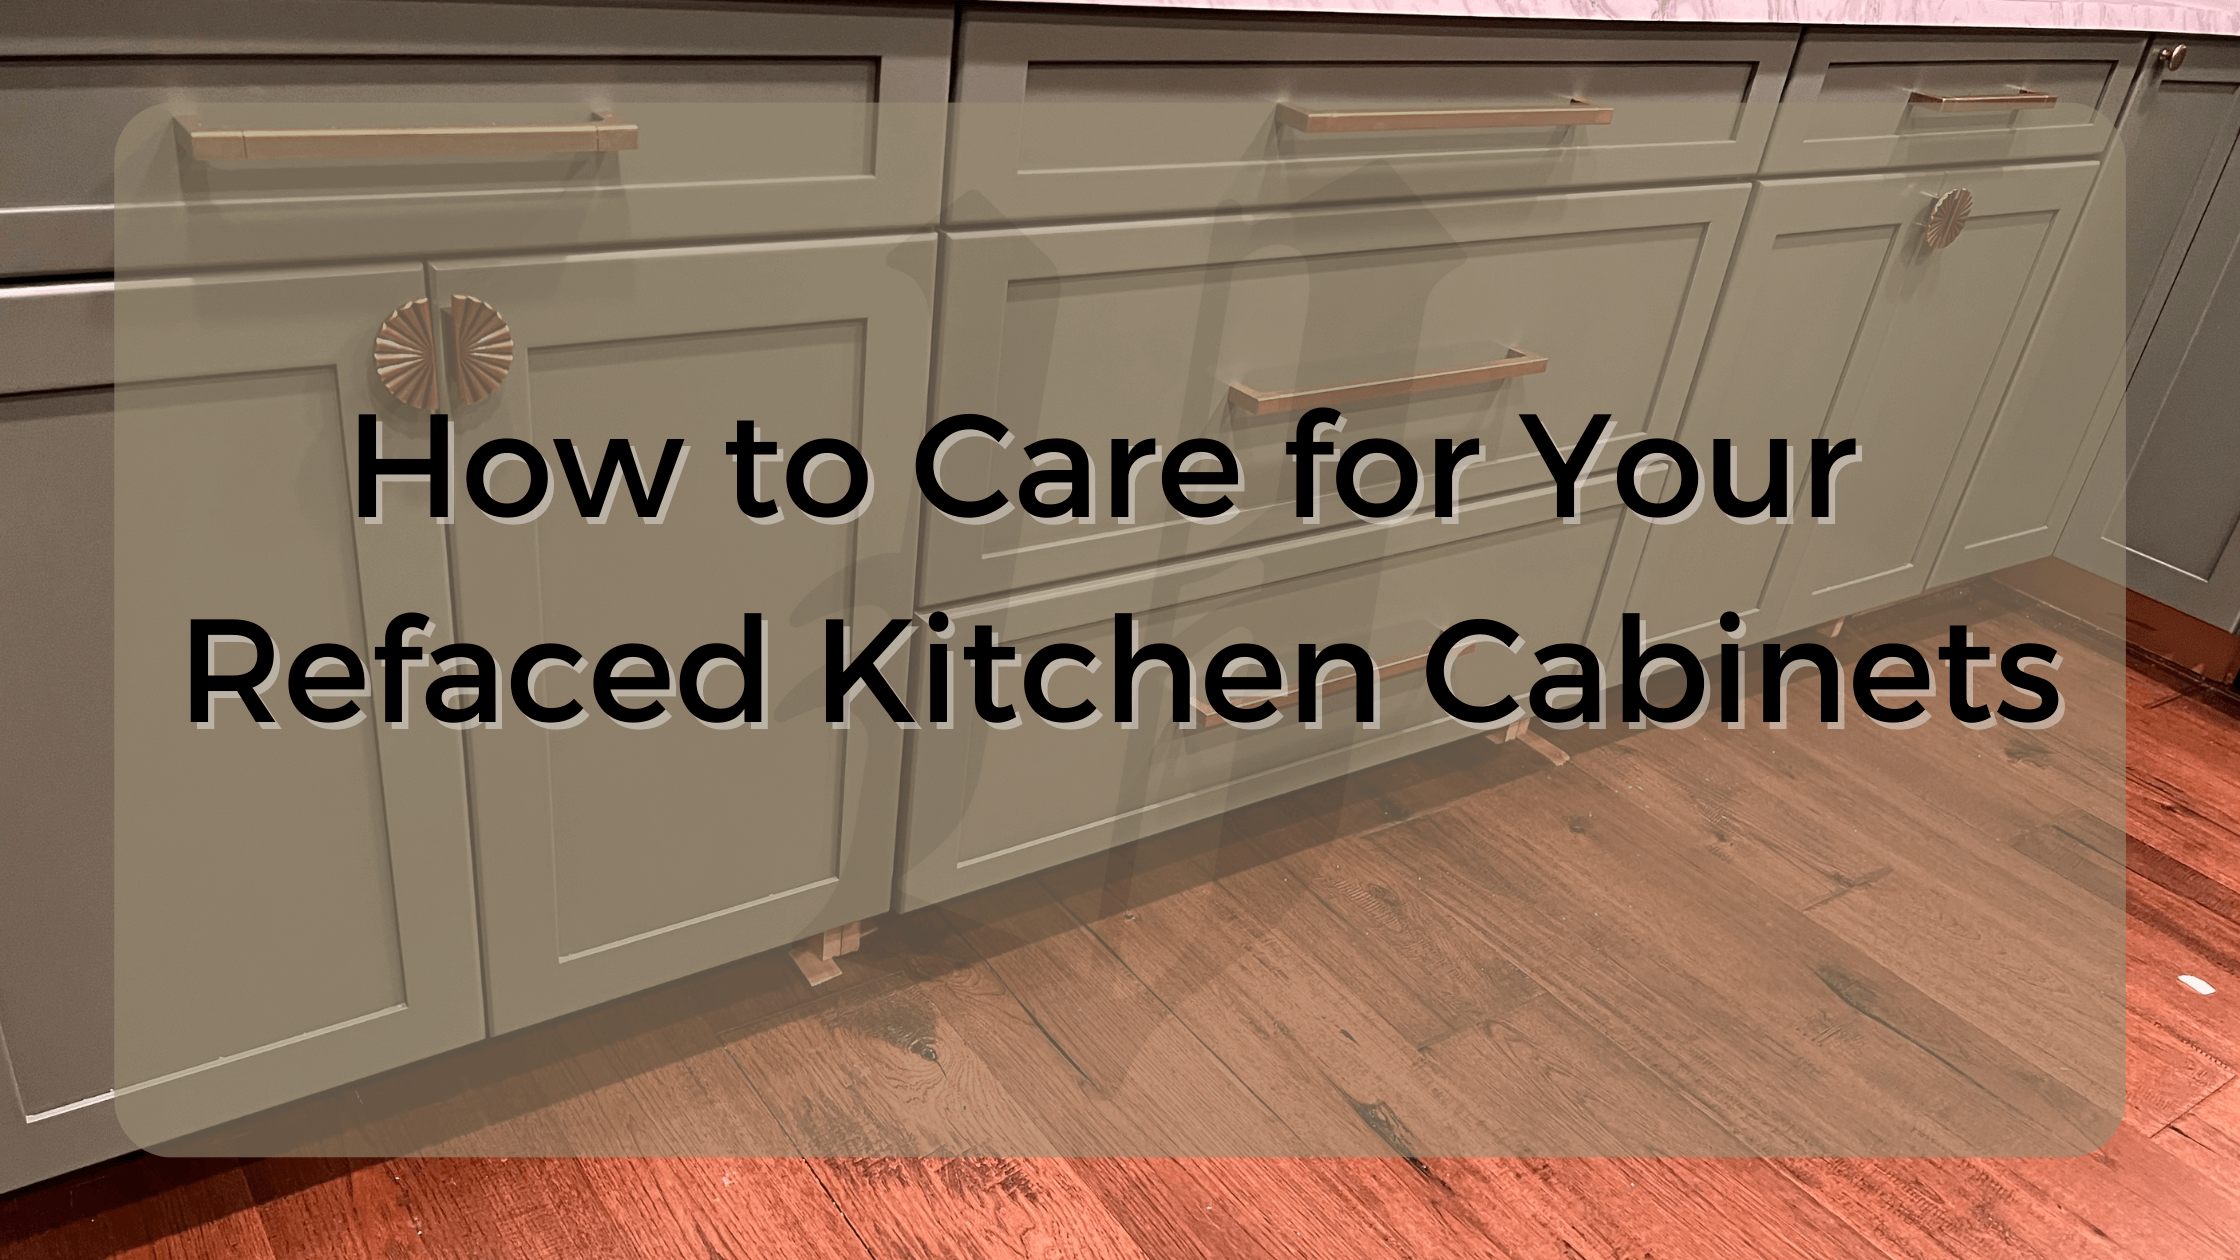 How to Care for Your Refaced Kitchen Cabinets